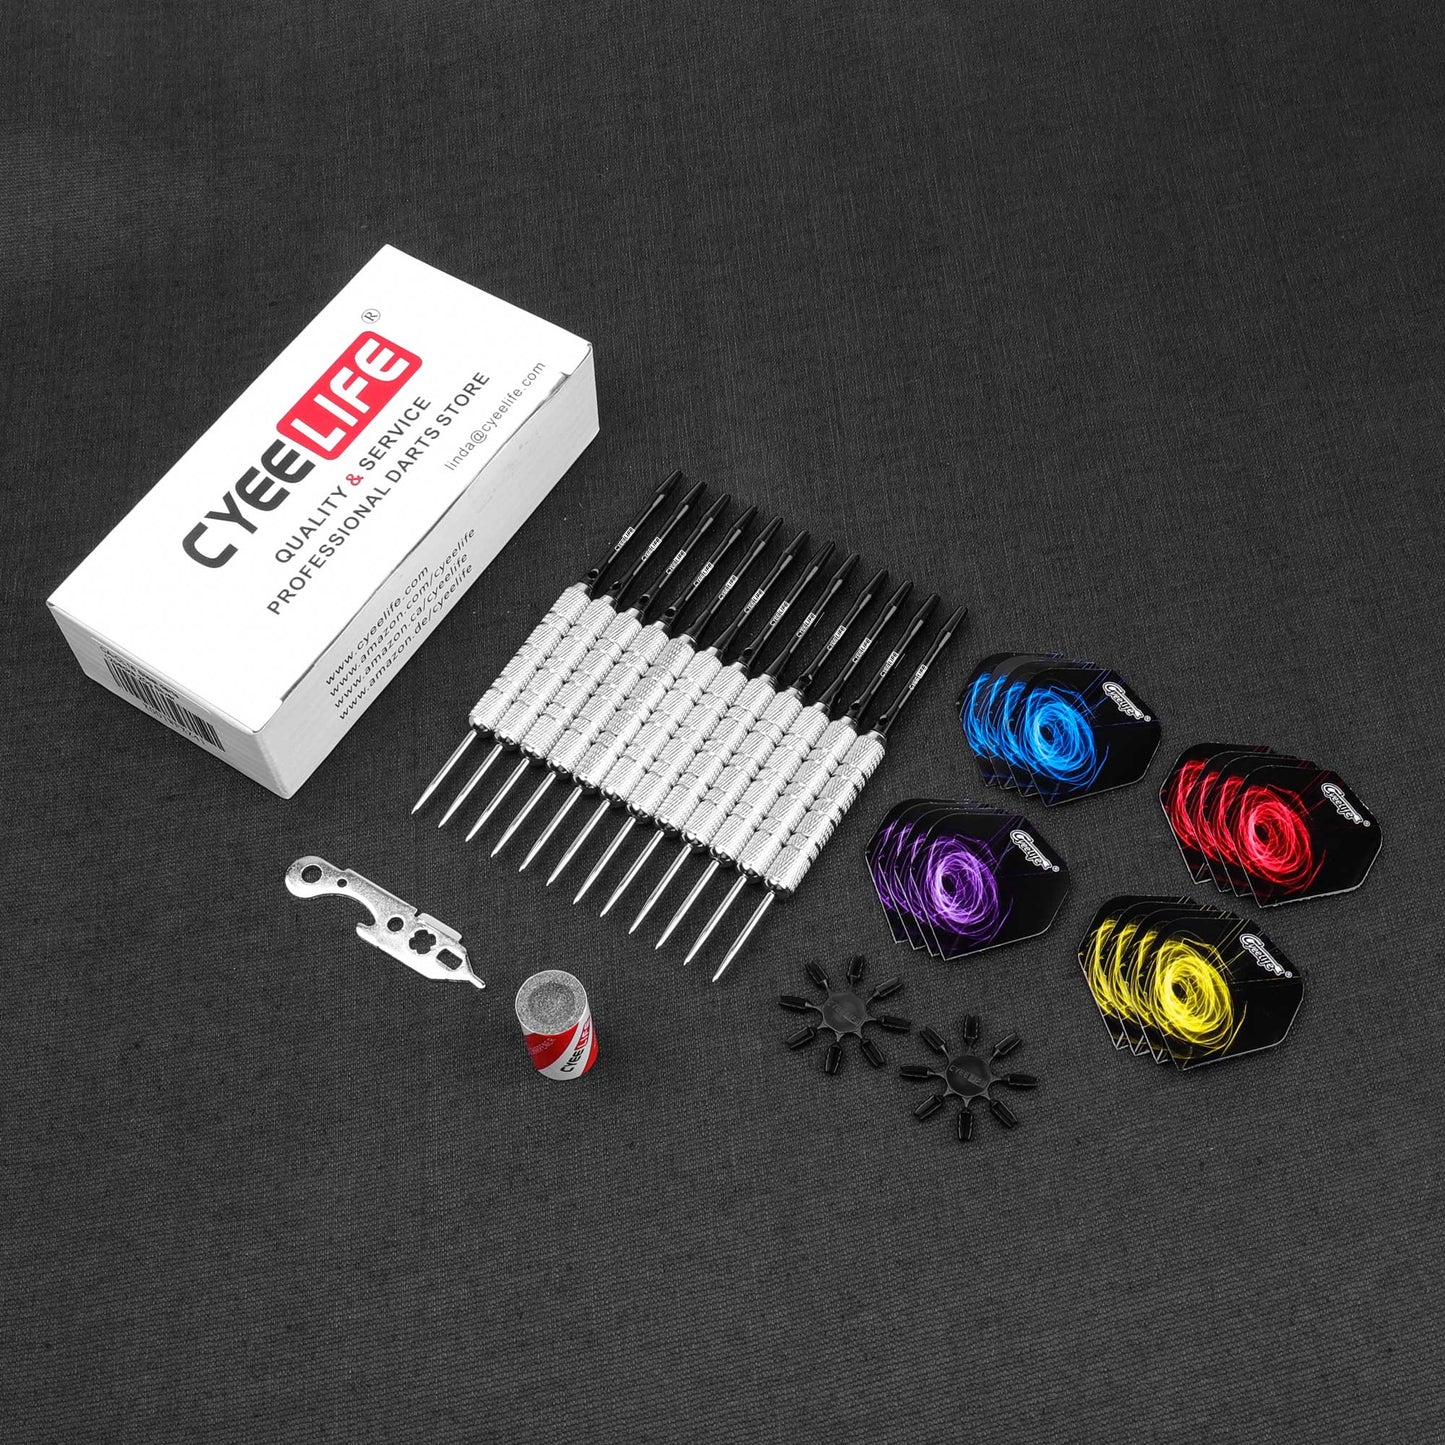 20g Steel tip darts with all shafts,12PCS